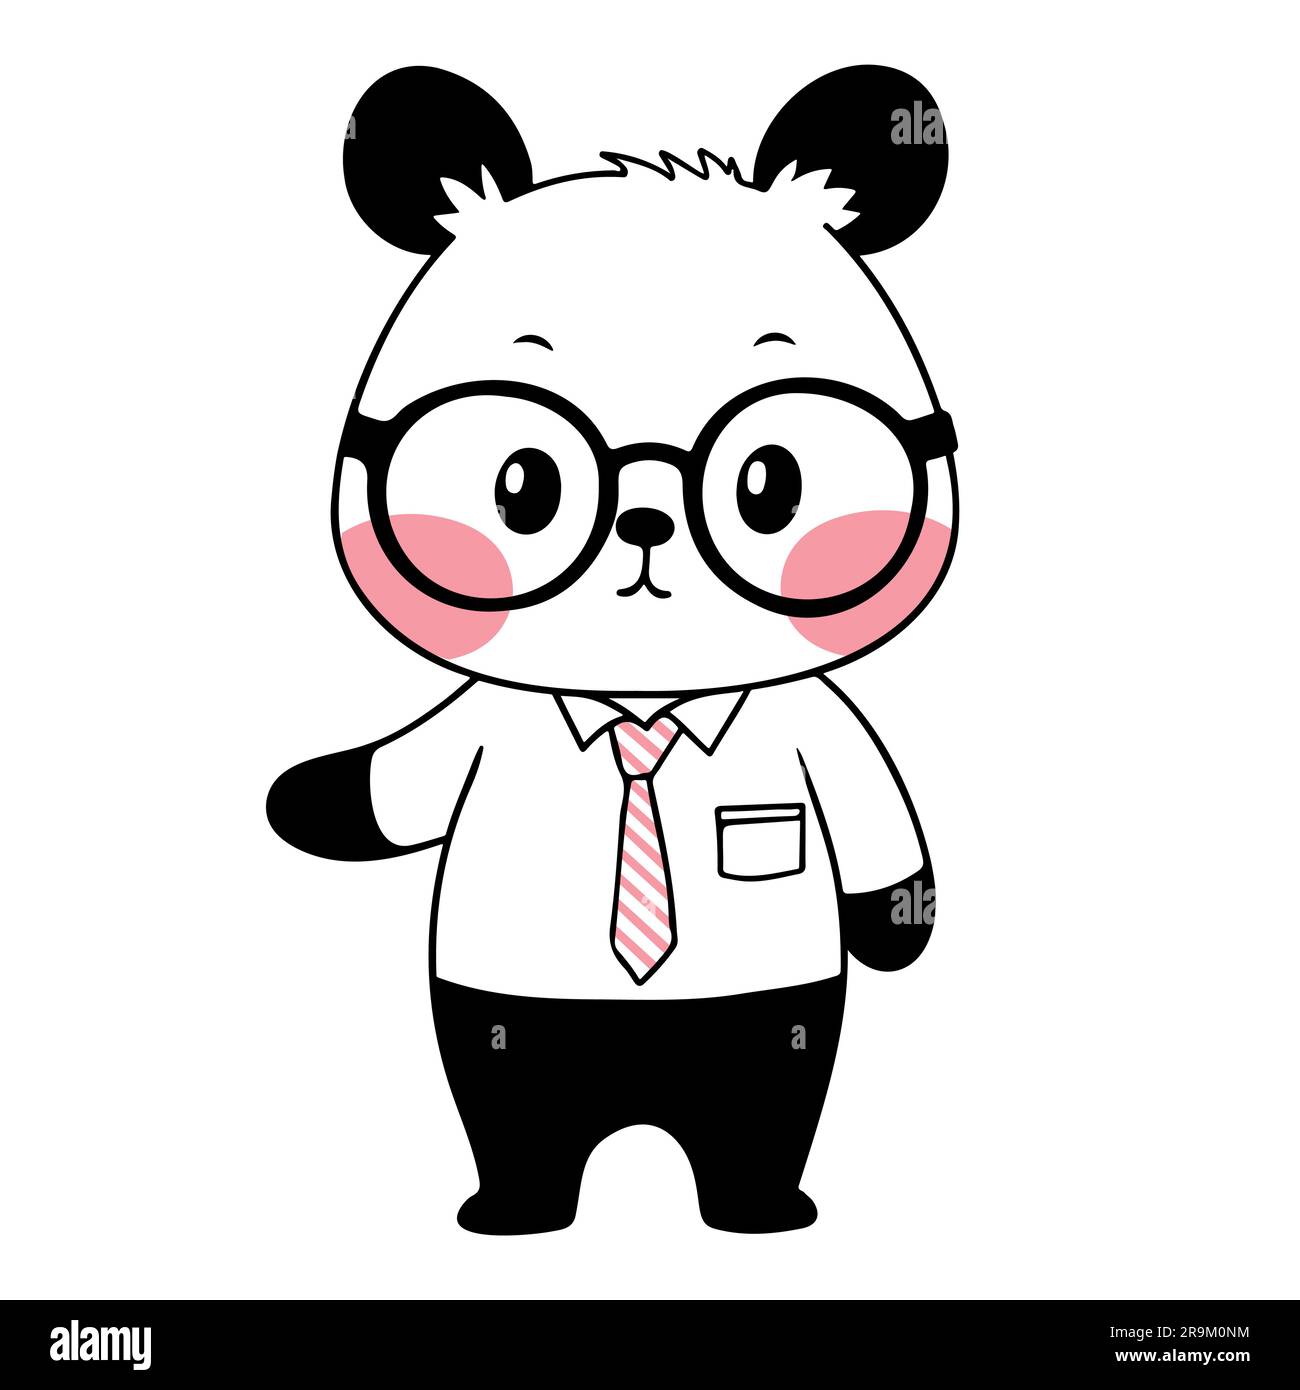 Vector illustration of an adorable panda bear wearing human clothes, showcasing a delightful blend of cuteness and anthropomorphism in artistic detail Stock Vector